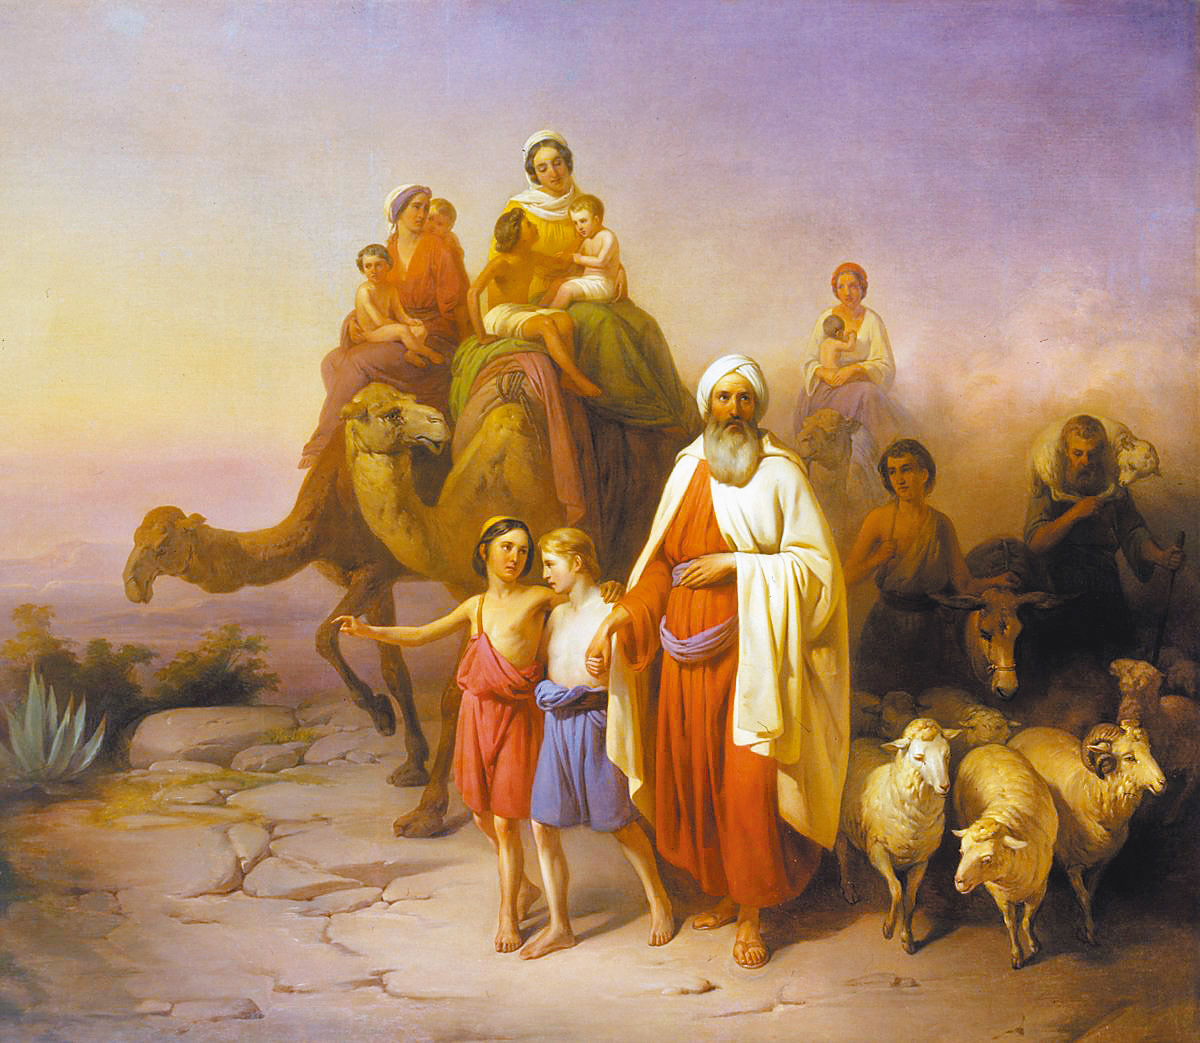 Abraham's Journey from Ur to Canaan, by József Molnár , 1850